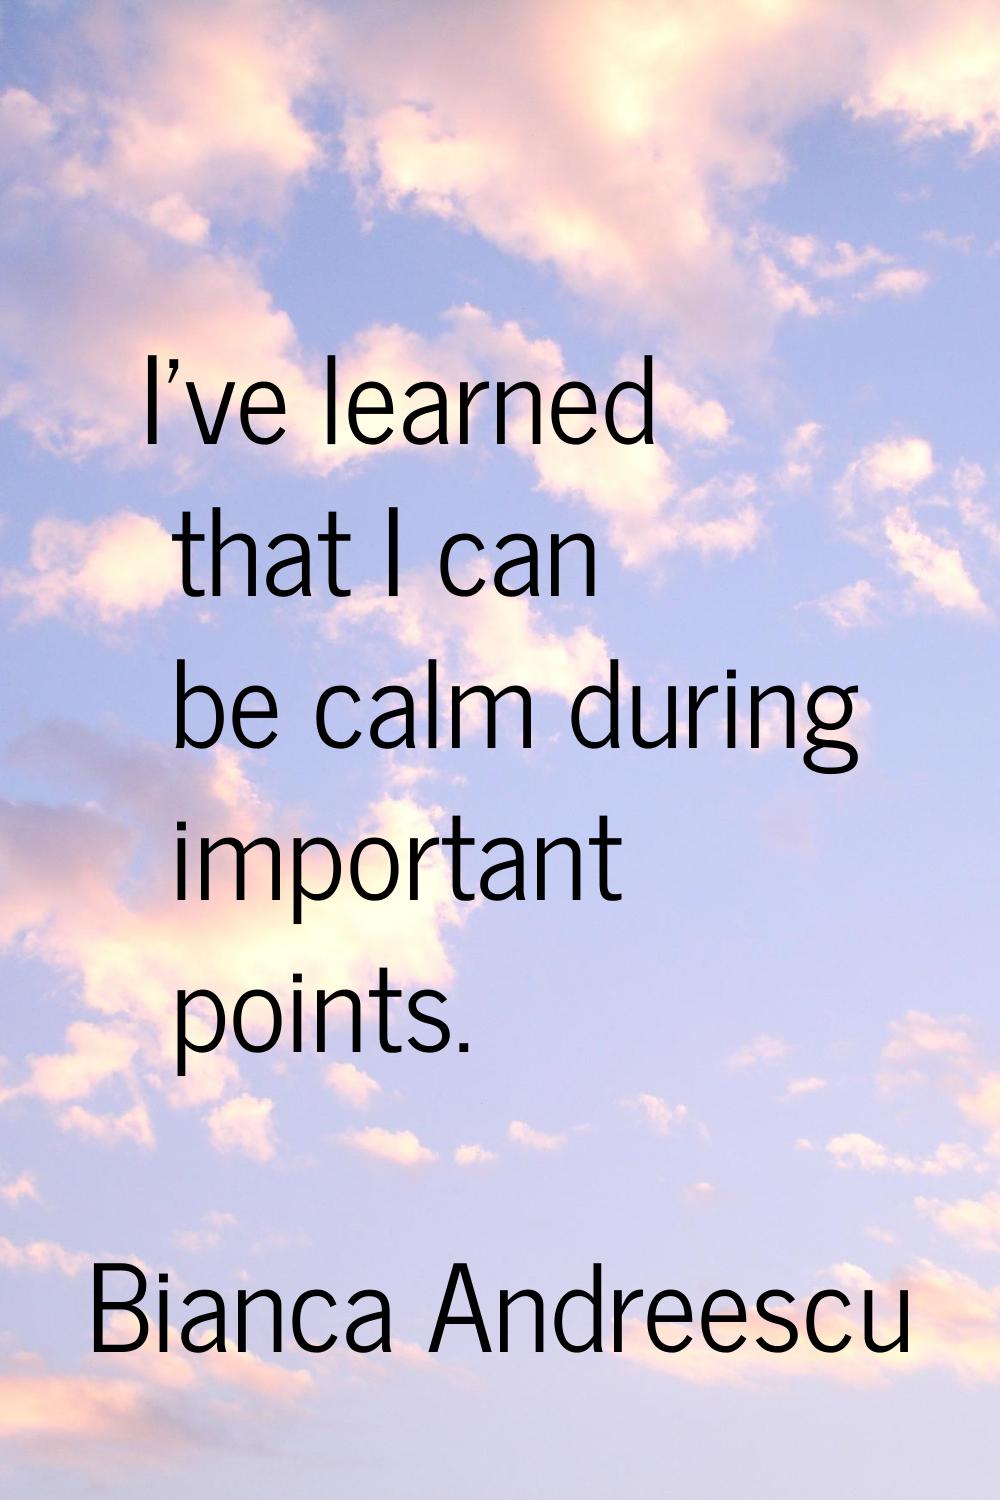 I've learned that I can be calm during important points.